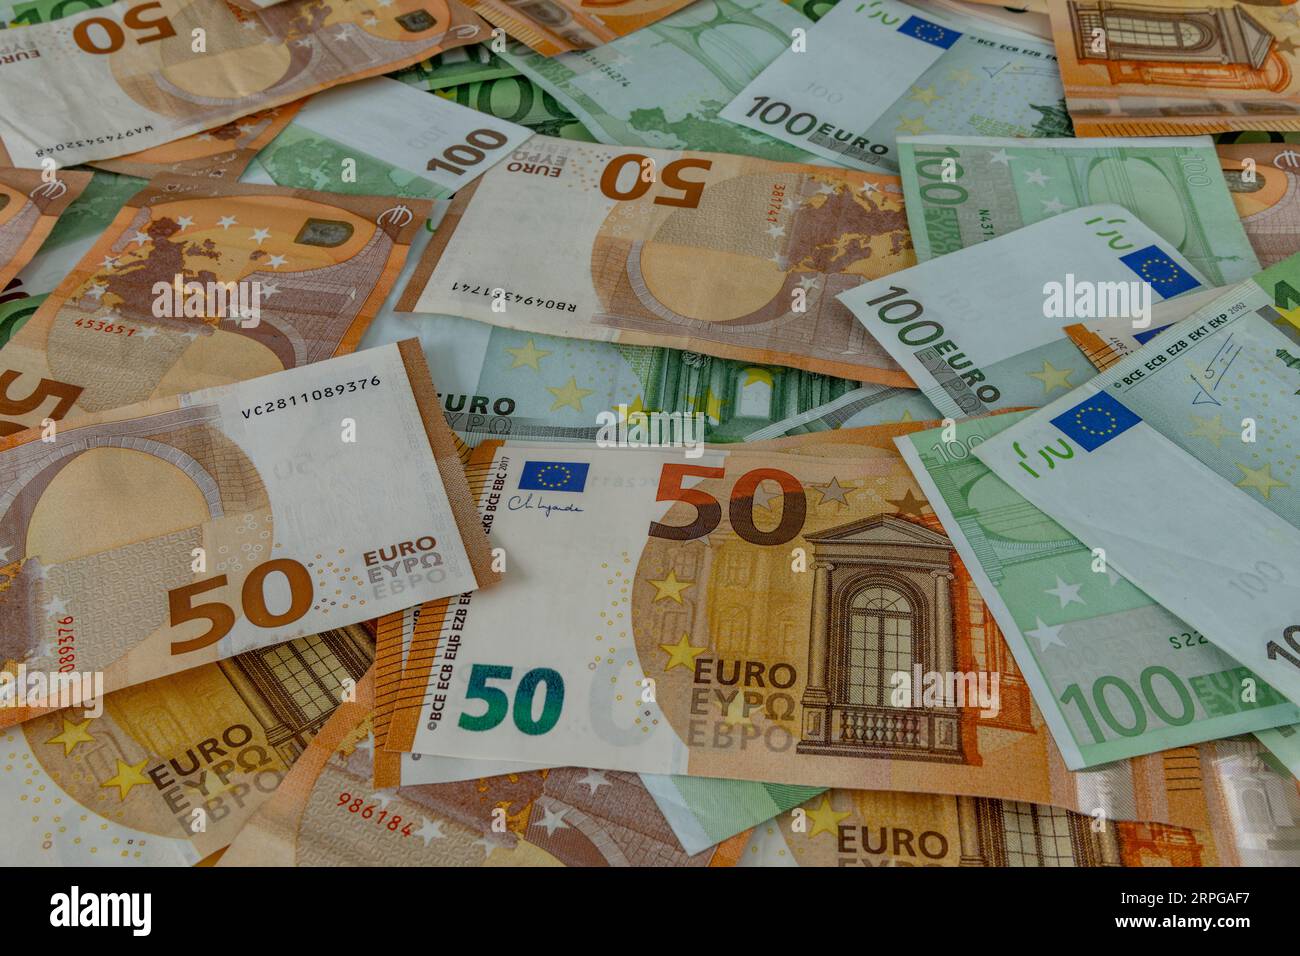 Money scattered on the table one hundred and two hundred Euro banknotes Stock Photo